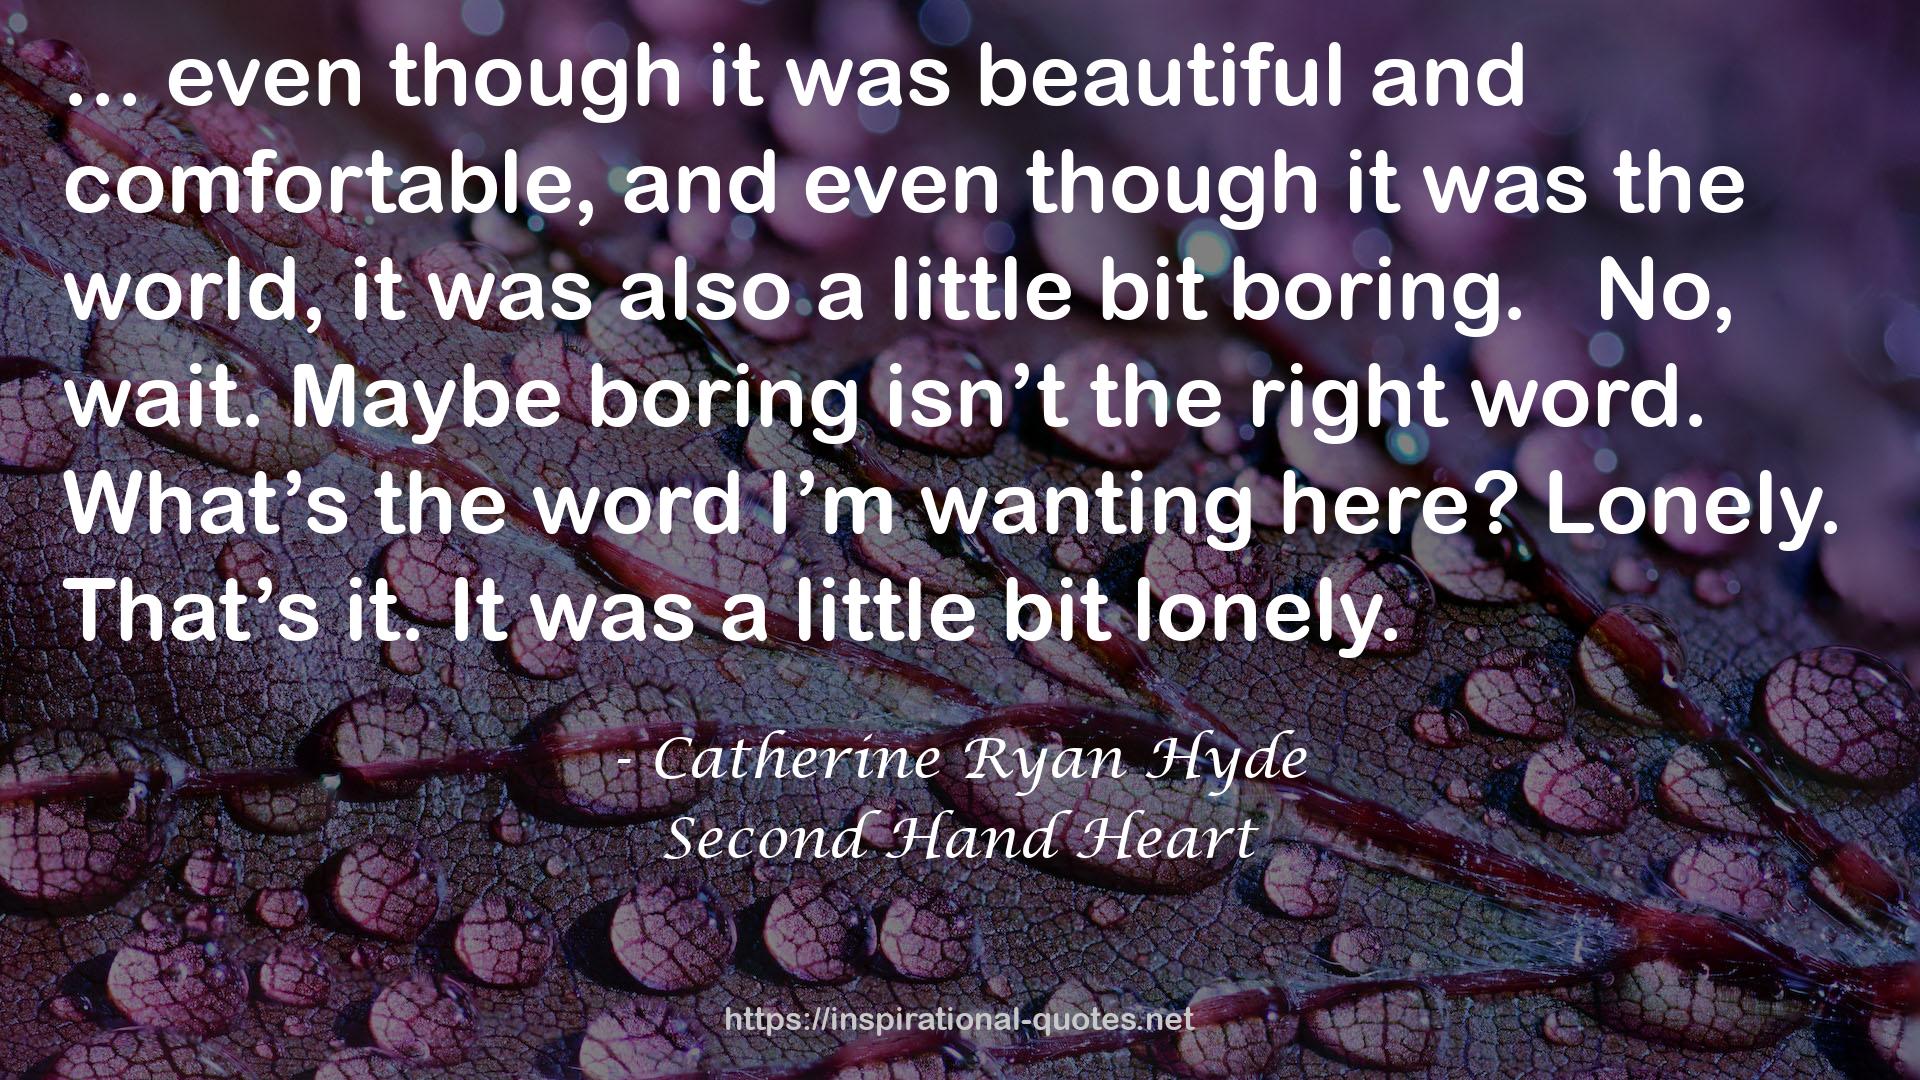 Second Hand Heart QUOTES